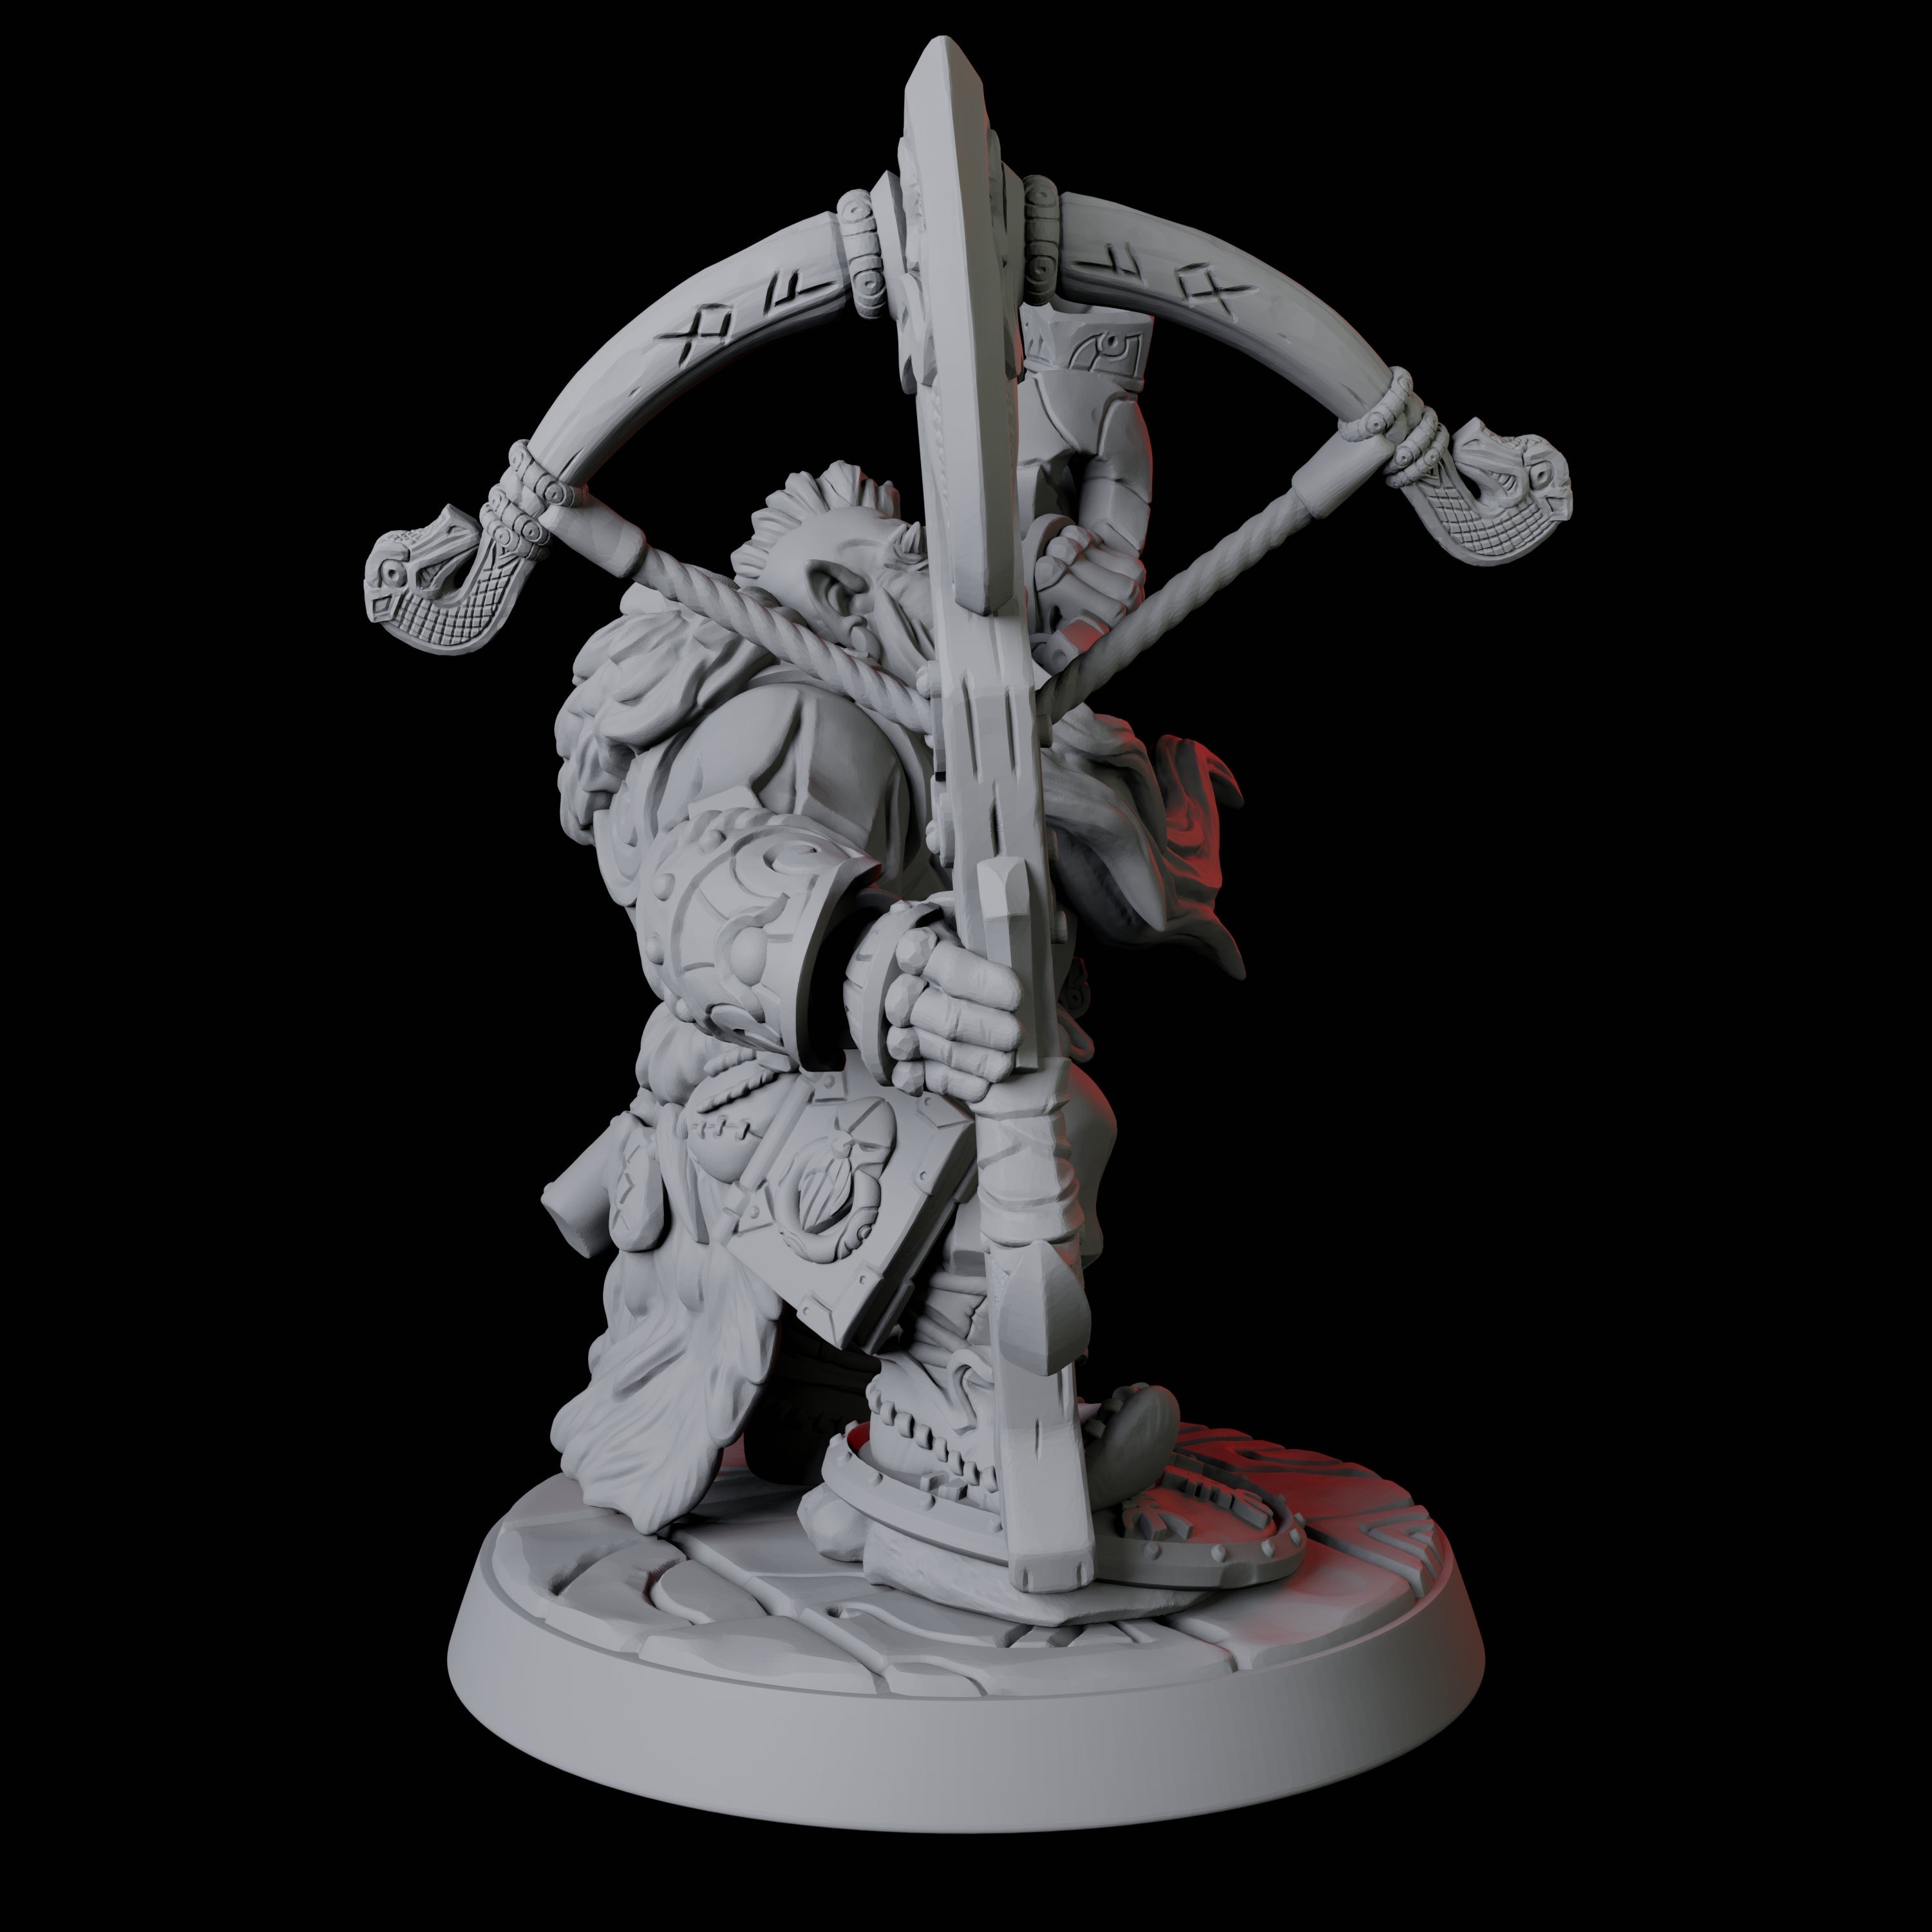 Horn Blowing Ranger Miniature for Dungeons and Dragons, Pathfinder or other TTRPGs